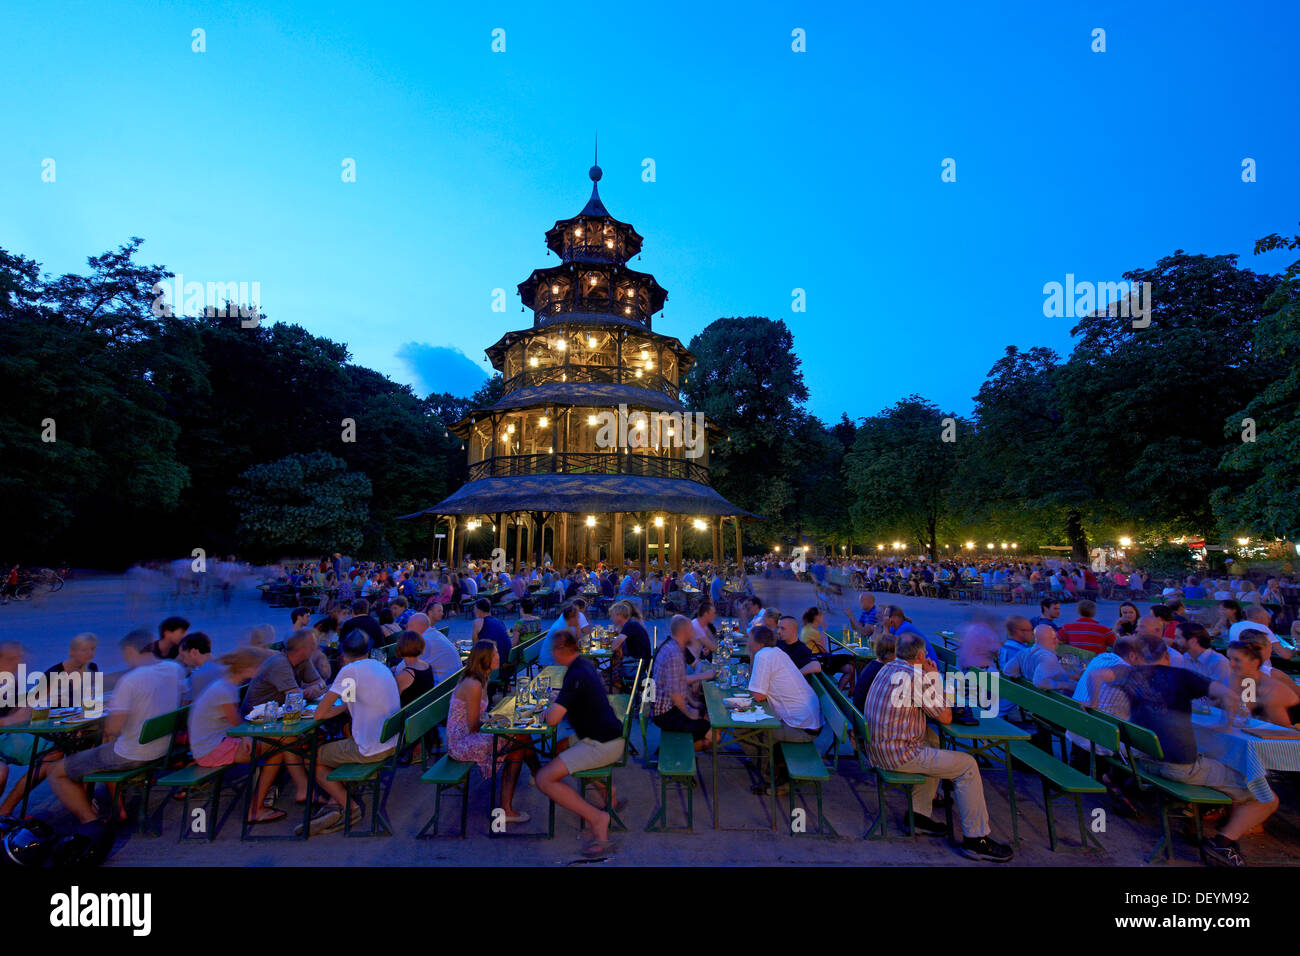 Beer Garden At The Chinese Tower In The English Garden Munich